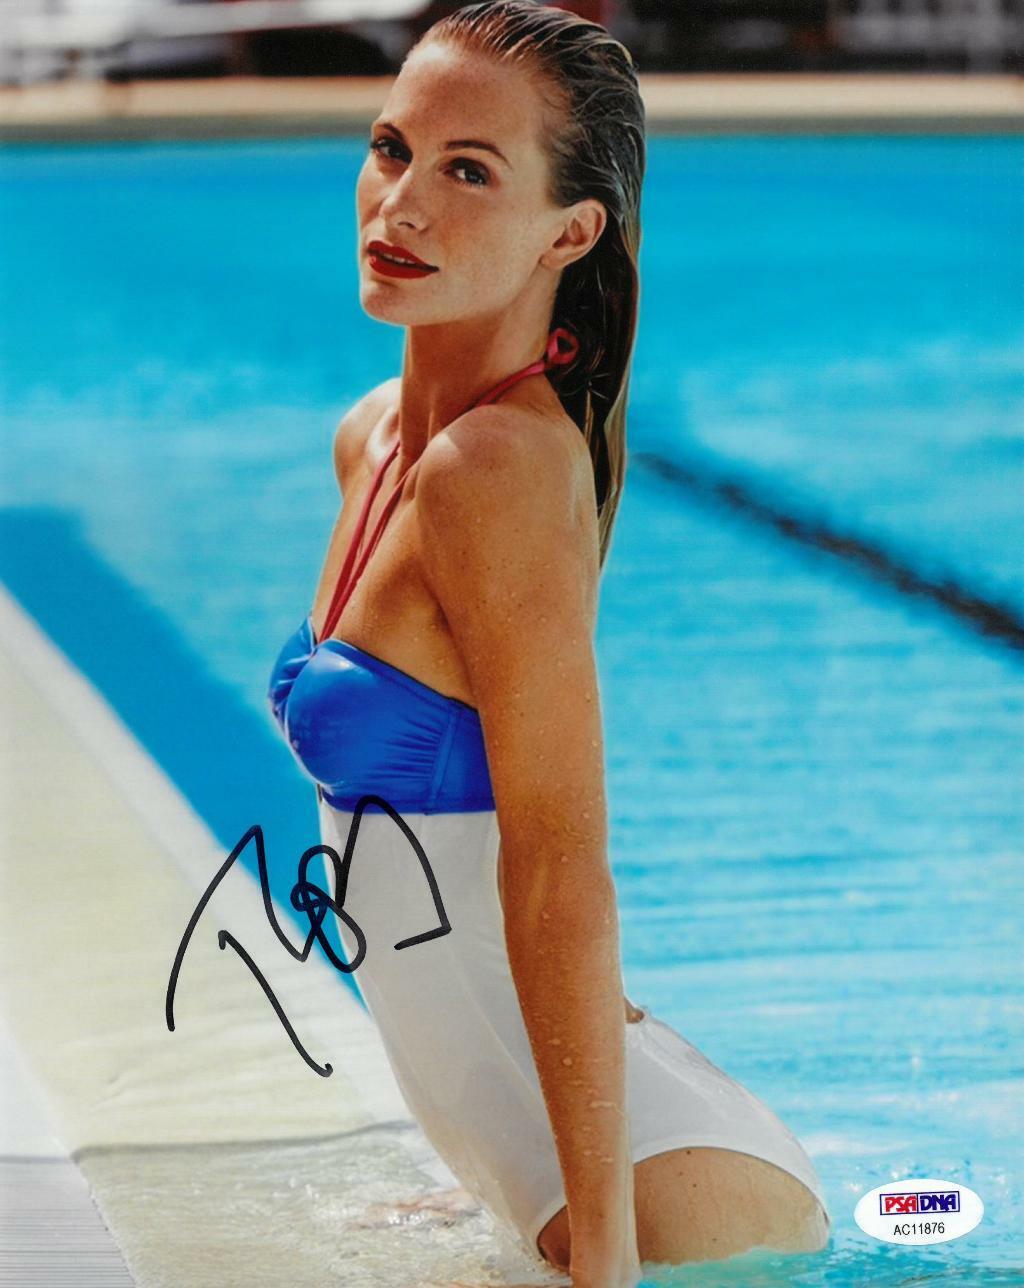 Poppy Delevingne Signed Sexy Authentic Autographed 8x10 Photo Poster painting PSA/DNA #AC11876